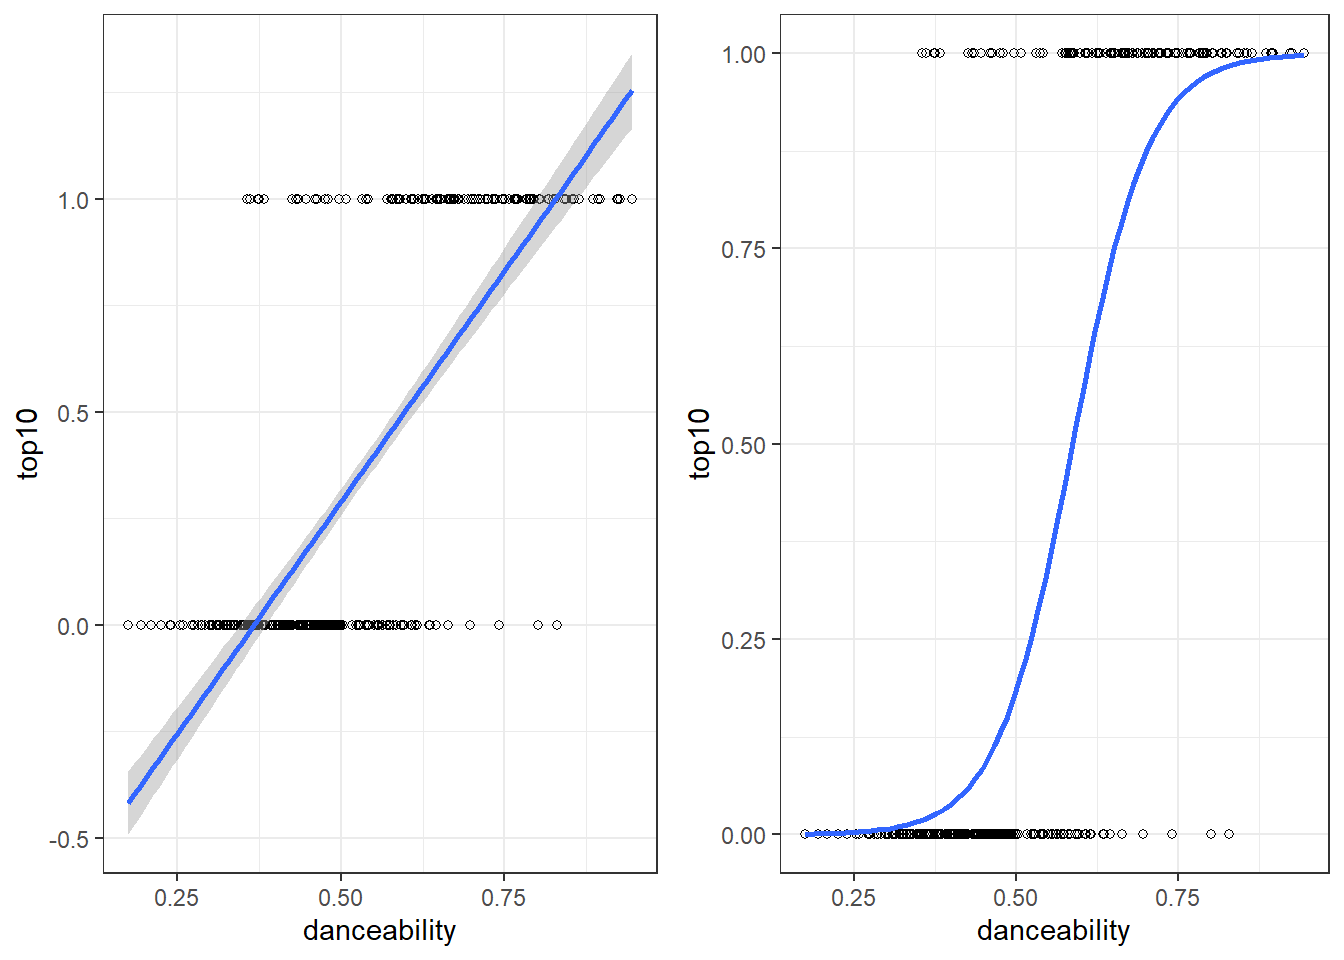 The same binary data explained by two models; A linear probability model (on the left) and a logistic regression model (on the right)